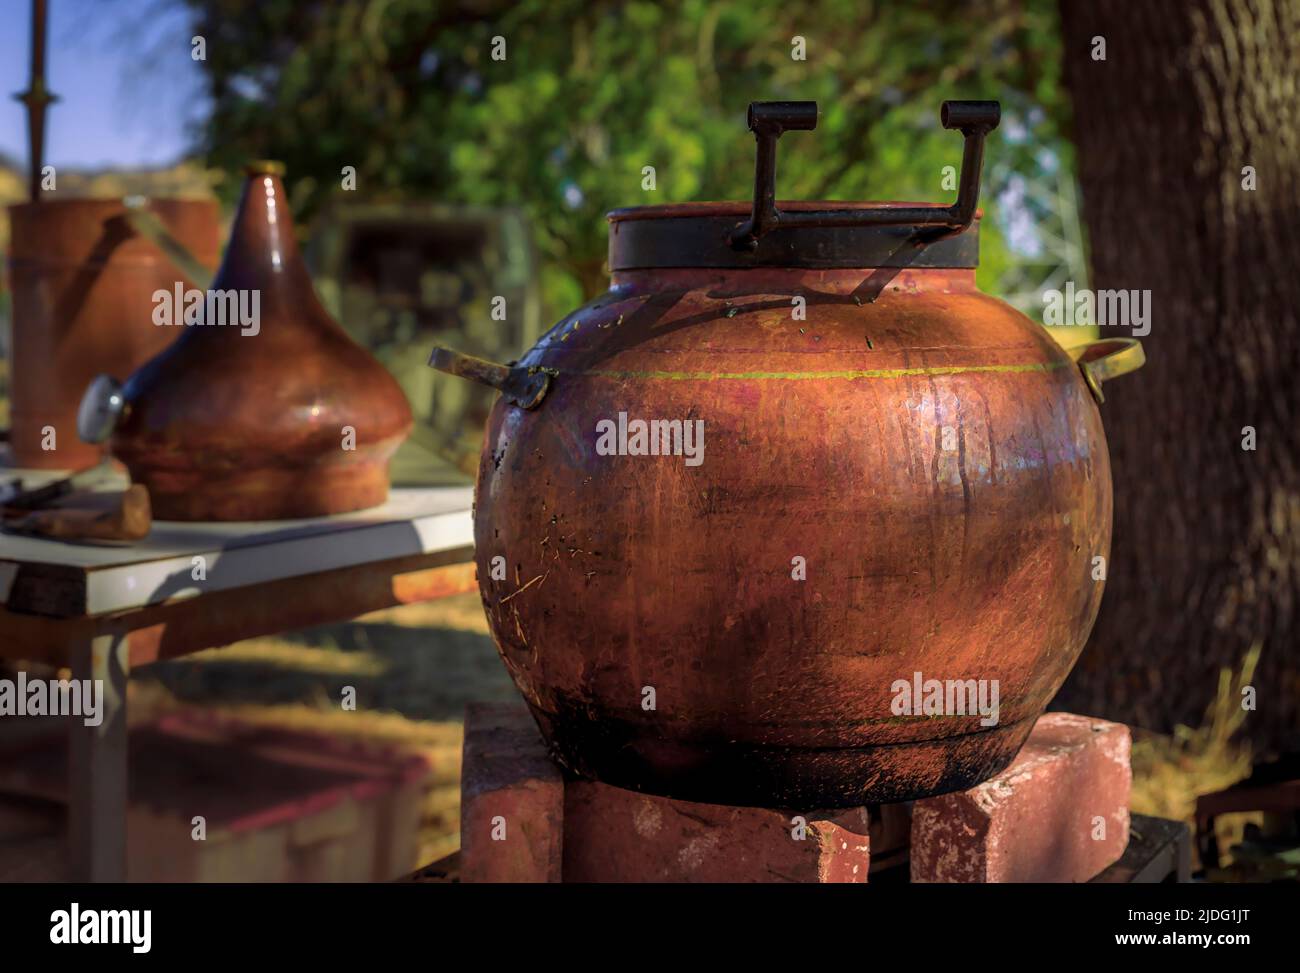 Copper still set up at a lavender field ready to distill the essential oil on a farm in Vacaville Northern California, near San Francisco Stock Photo